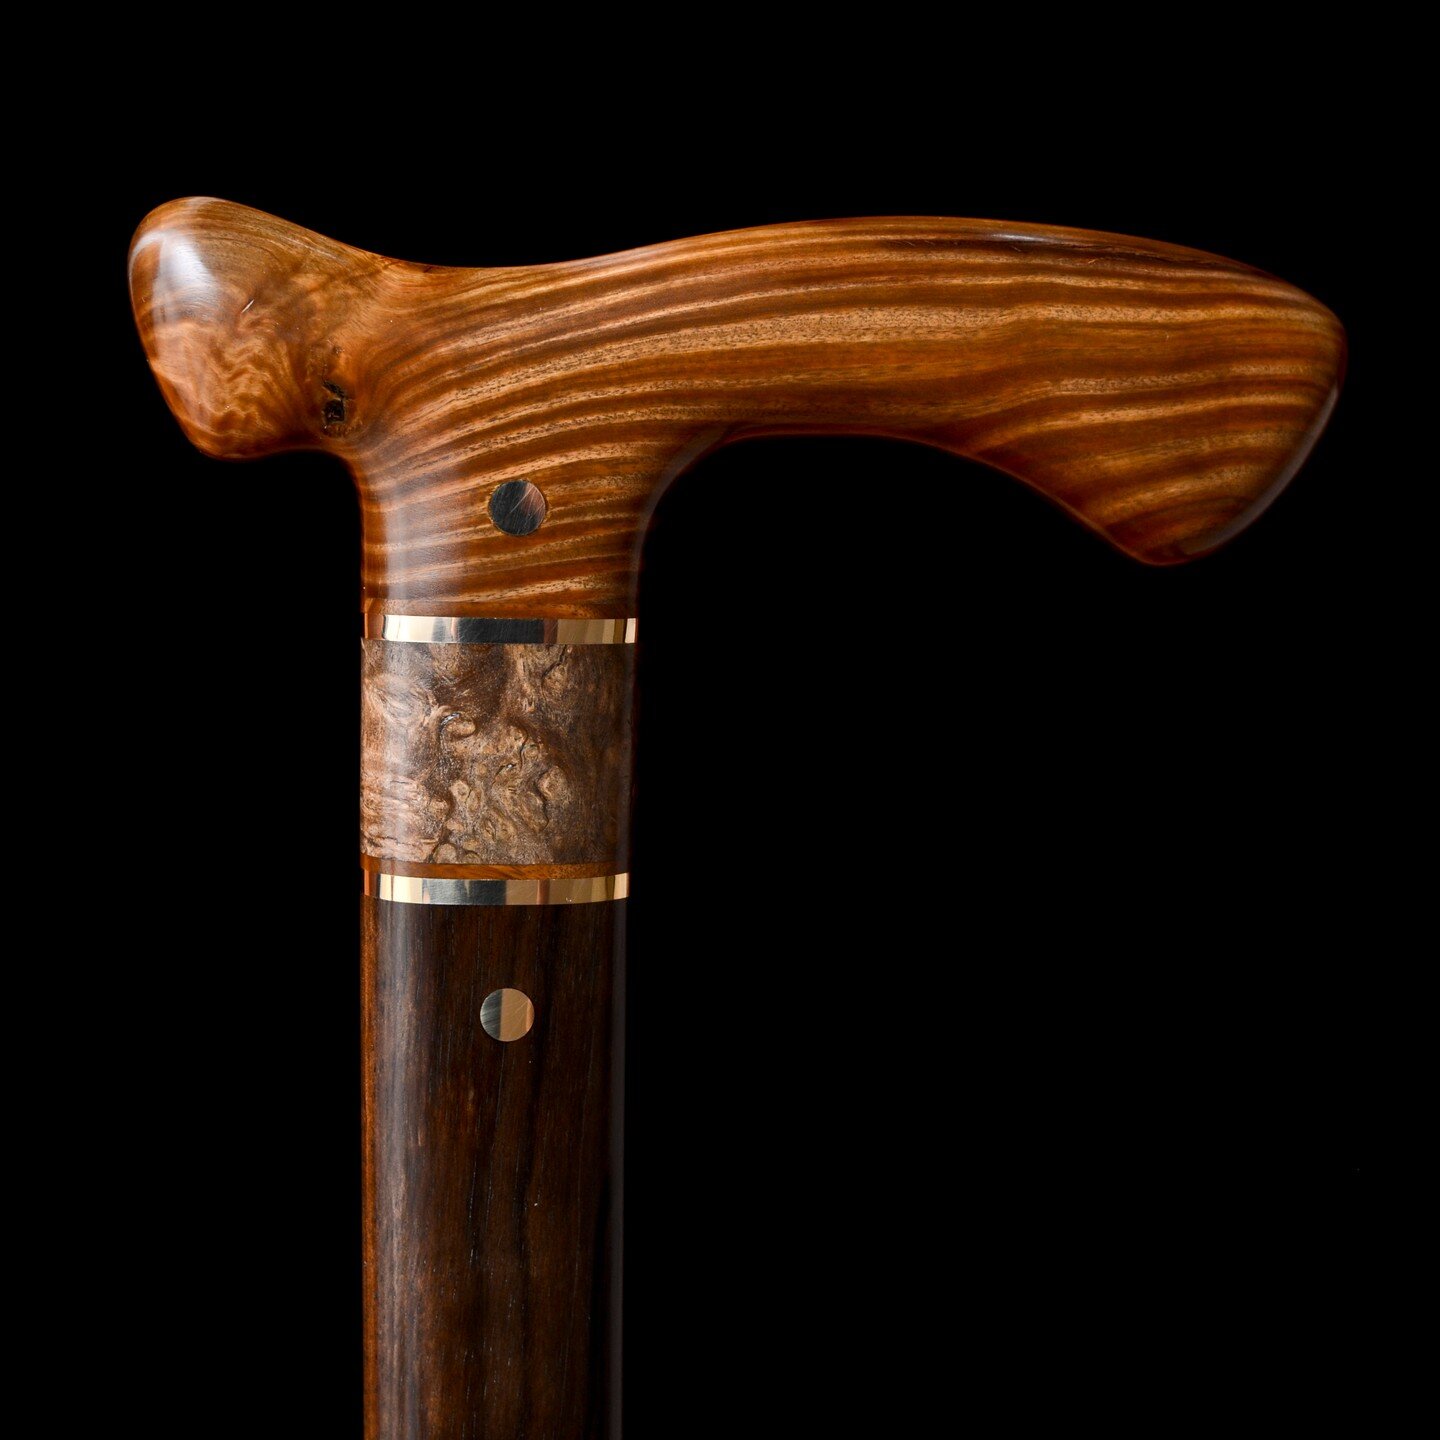 Guayacan, Genuine &quot;Lignum Vitae&quot;, the densest wood in the world. Divider of Sindora burl from Laos, and a Mun ebony shaft. Available on Gilliscanes.com